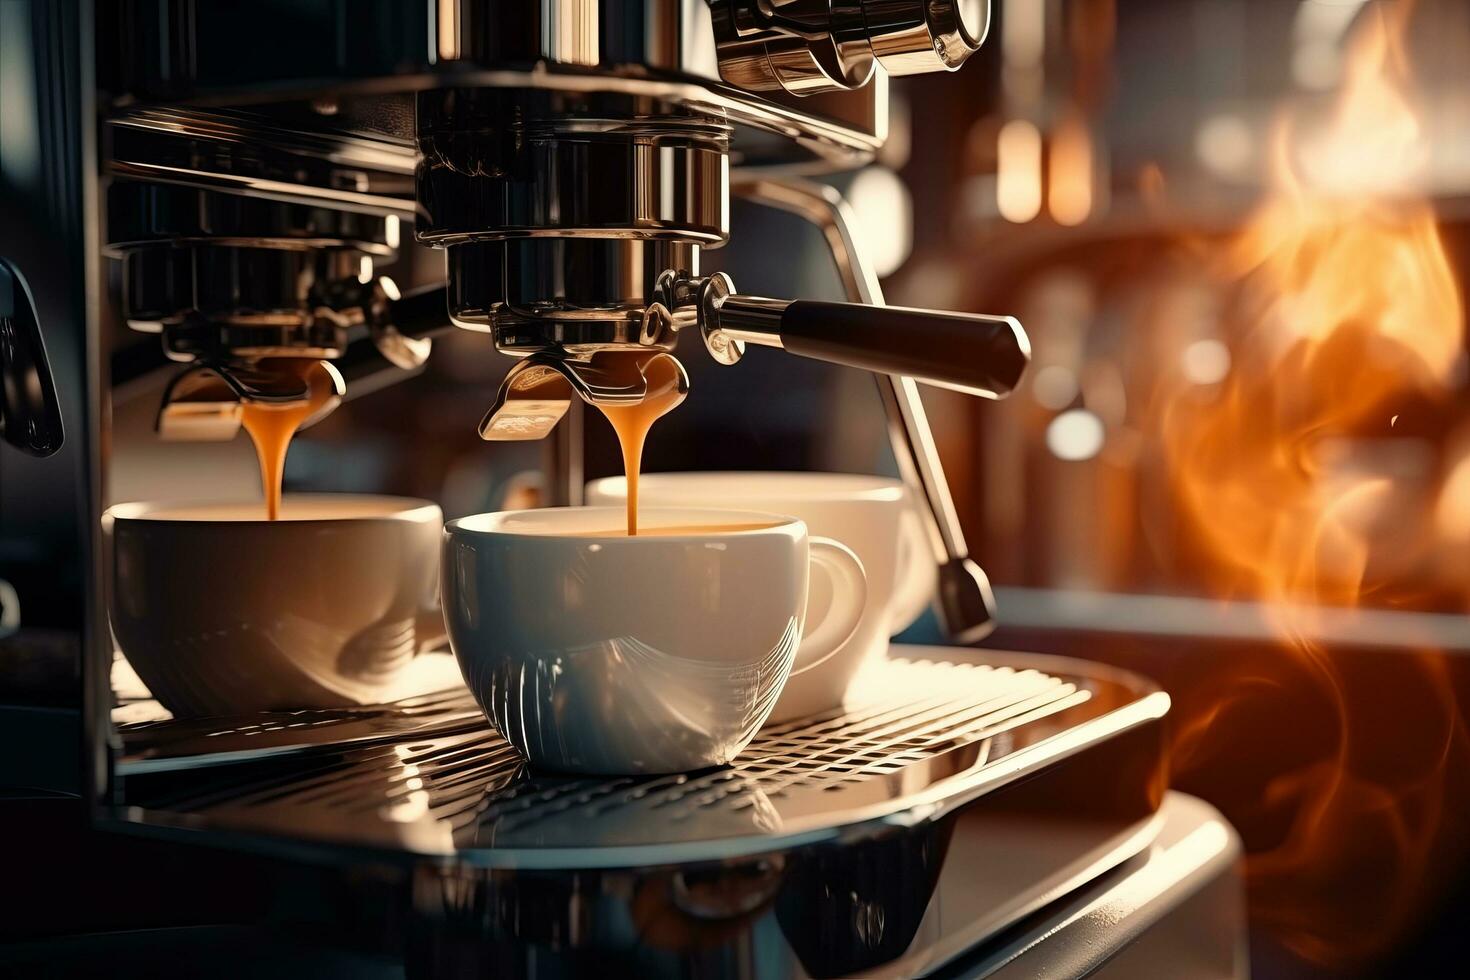 Cup of coffee being drained by espresso brewing machine, photo